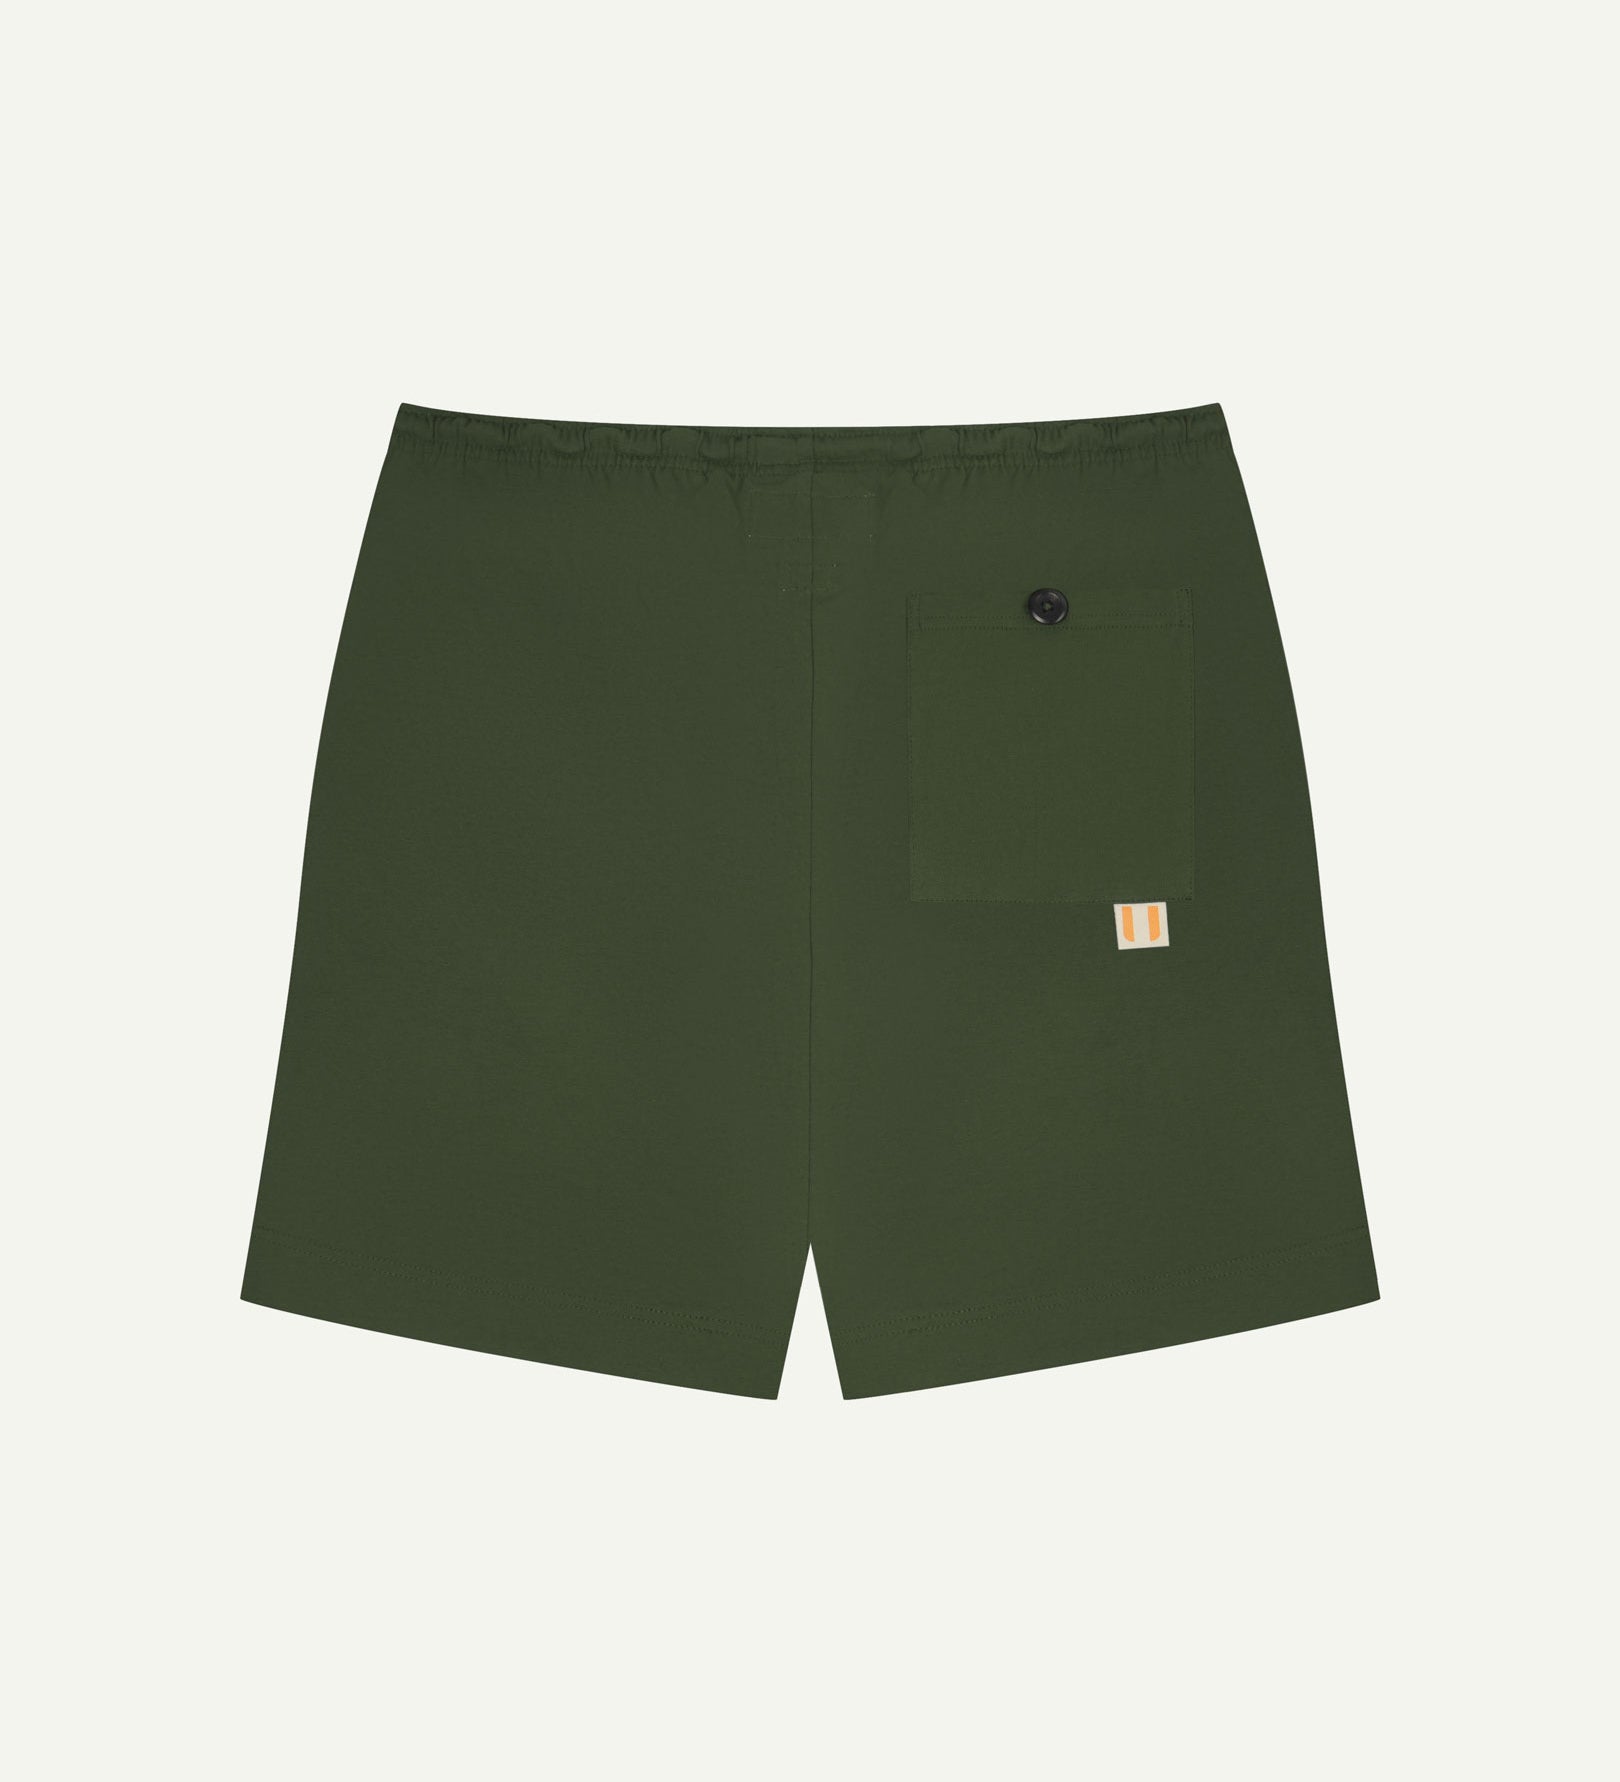 Back view of coriander-green men's organic cotton 7007 men's shorts by Uskees against white background. Clear view of pocket and logo label.